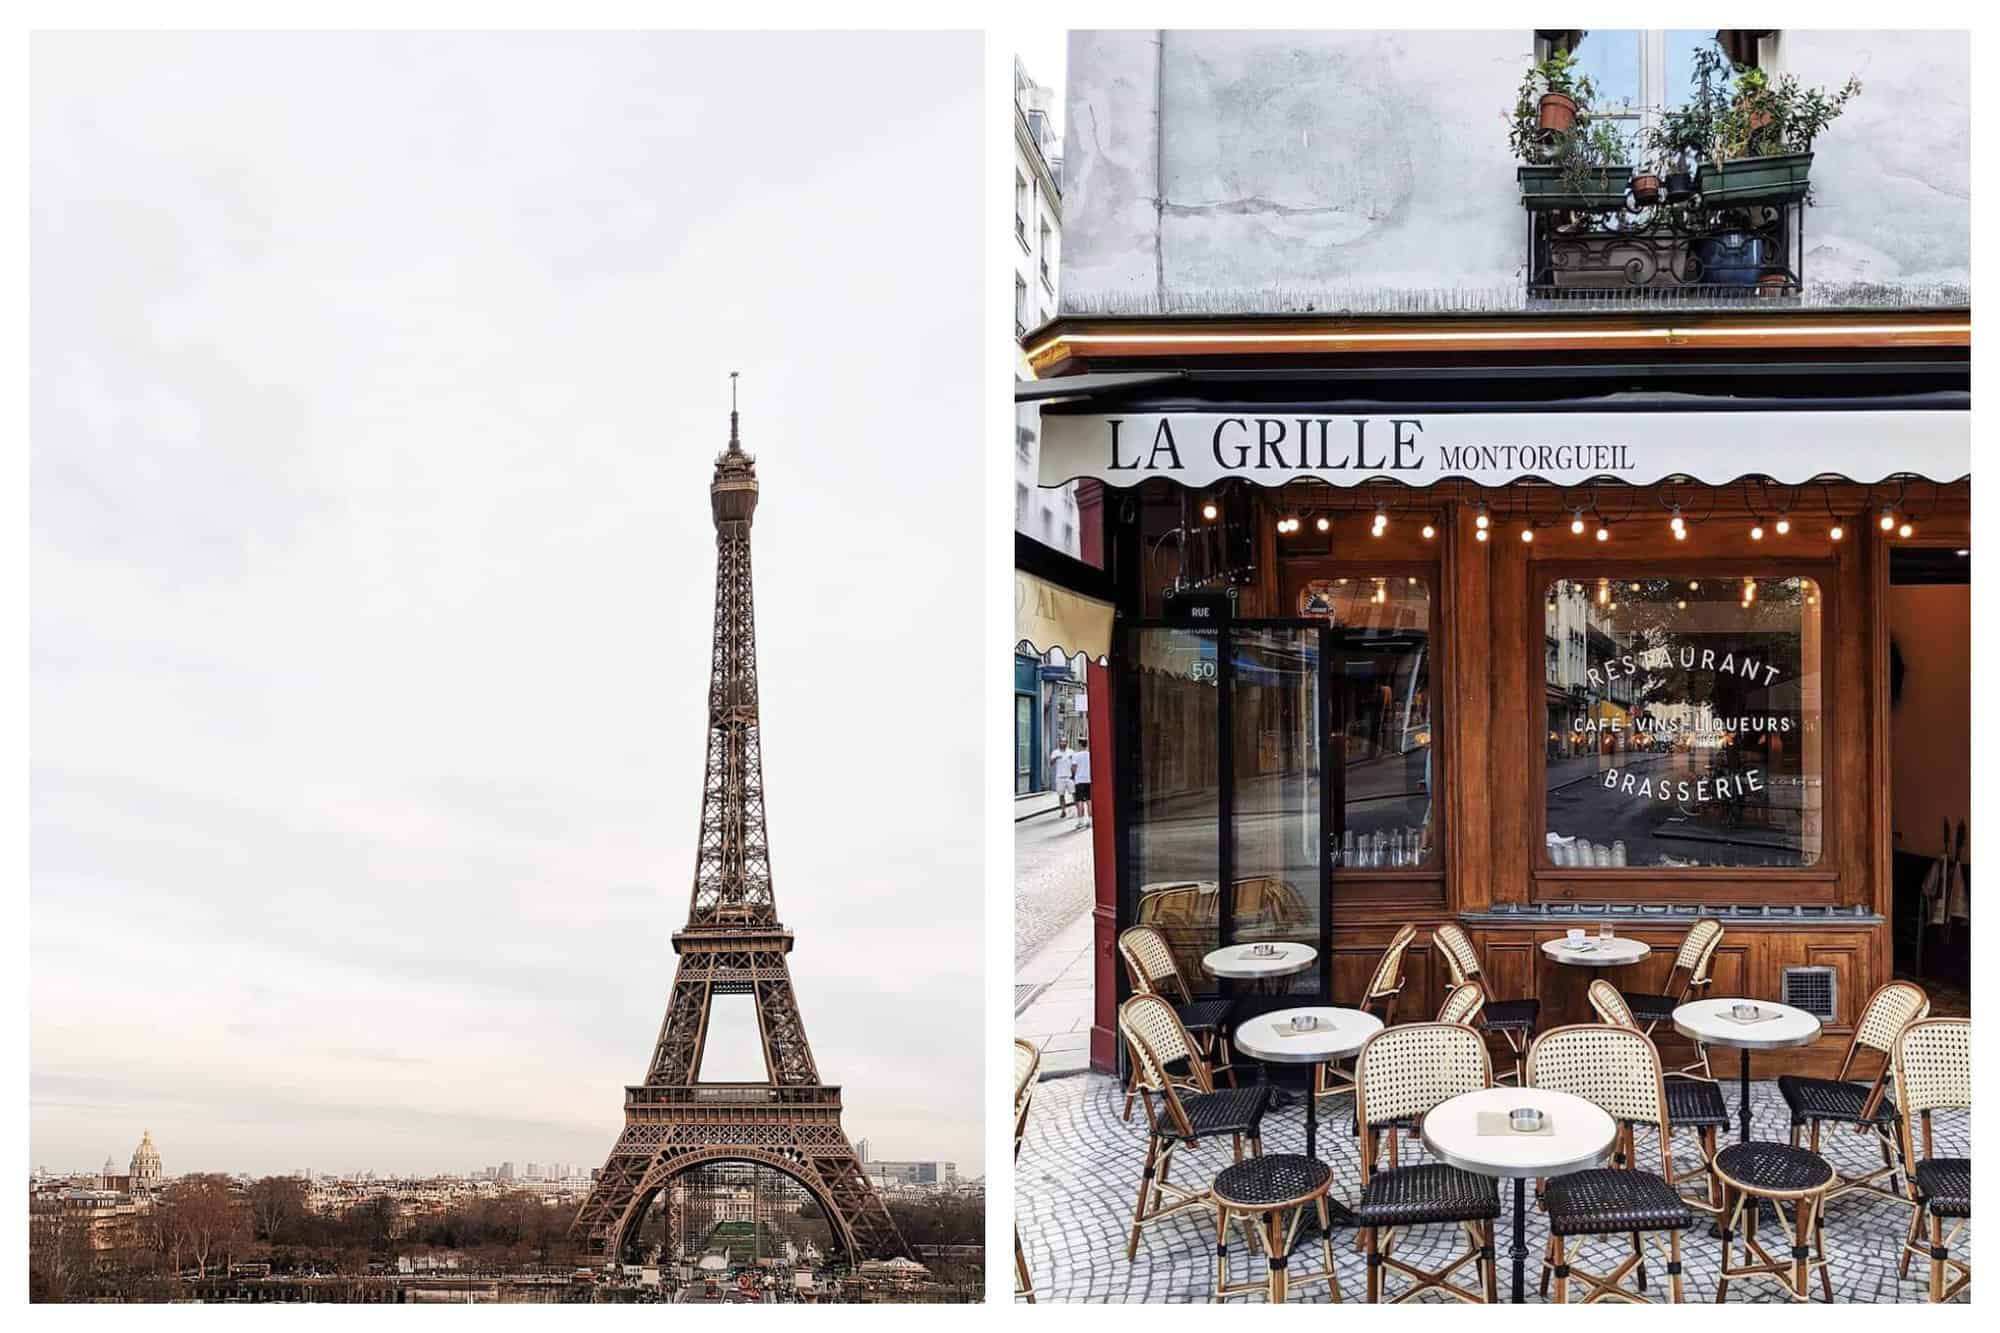 Left: the Eiffel Tower in Paris. The sky is pastel blue and takes up most of the photo. Buildings can be seen at the base of the Eiffel Tower. Right: the exterior of a café in Paris. There are several empty tables and chairs visible. The front of the restaurant is covered in wood and there is a large window visible. The name of the restaurant is printed in black on a white awning, " La Grille Montorgueil"